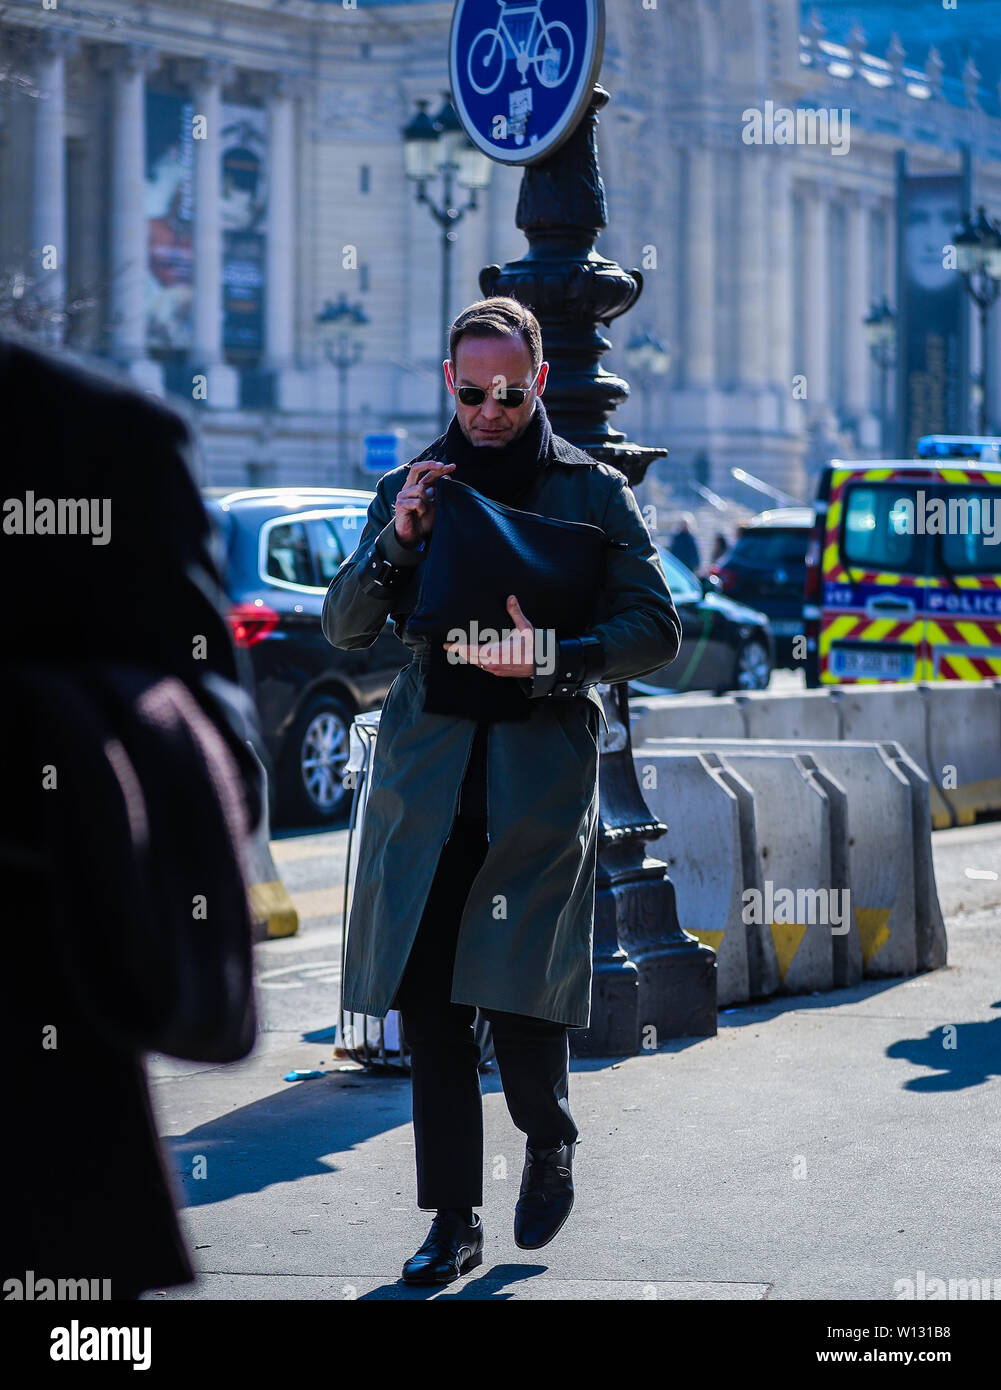 PARIS, France- February 27 2019: Men on the street during the Paris Fashion Week. (Photo by Mauro Del Signore / Pacific Press) Stock Photo